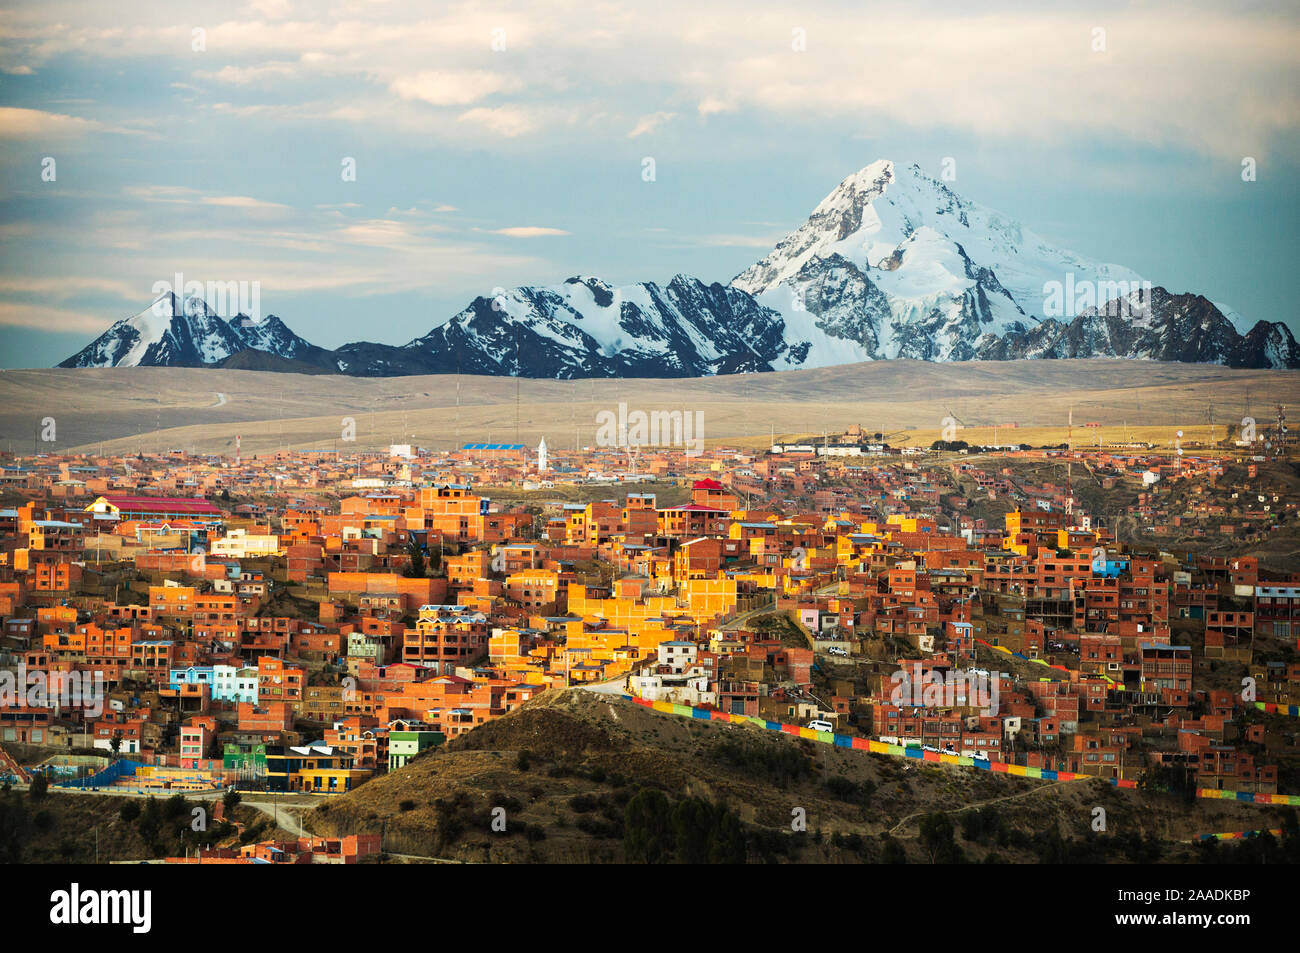 Peak of Huayna Potosi from El Alto above, La Paz, Bolivia. La Paz  and El Alto are critically short of water due to climate change causing  glaciers to melt. The glaciers provide water to the town. October 2015. Stock Photo